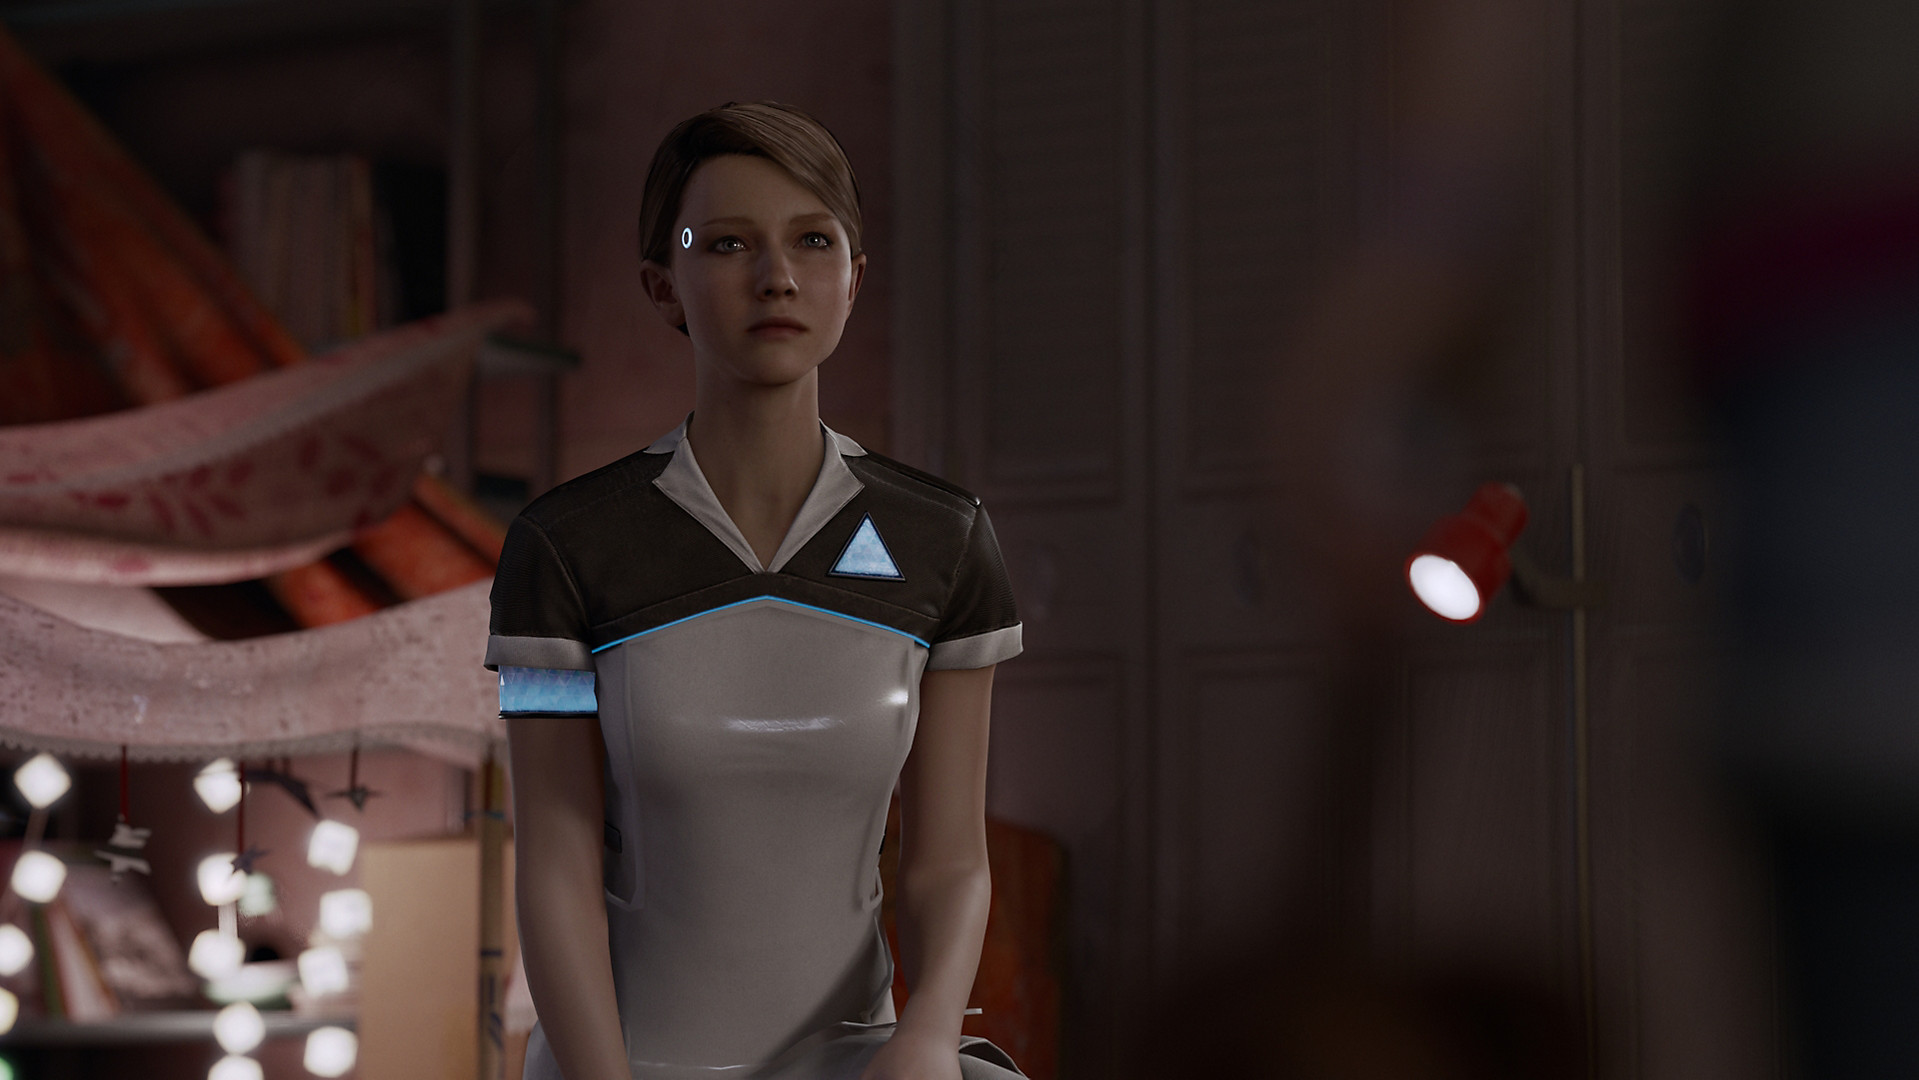 Detroit: Become Human: Androids revolt in neo-noir thriller